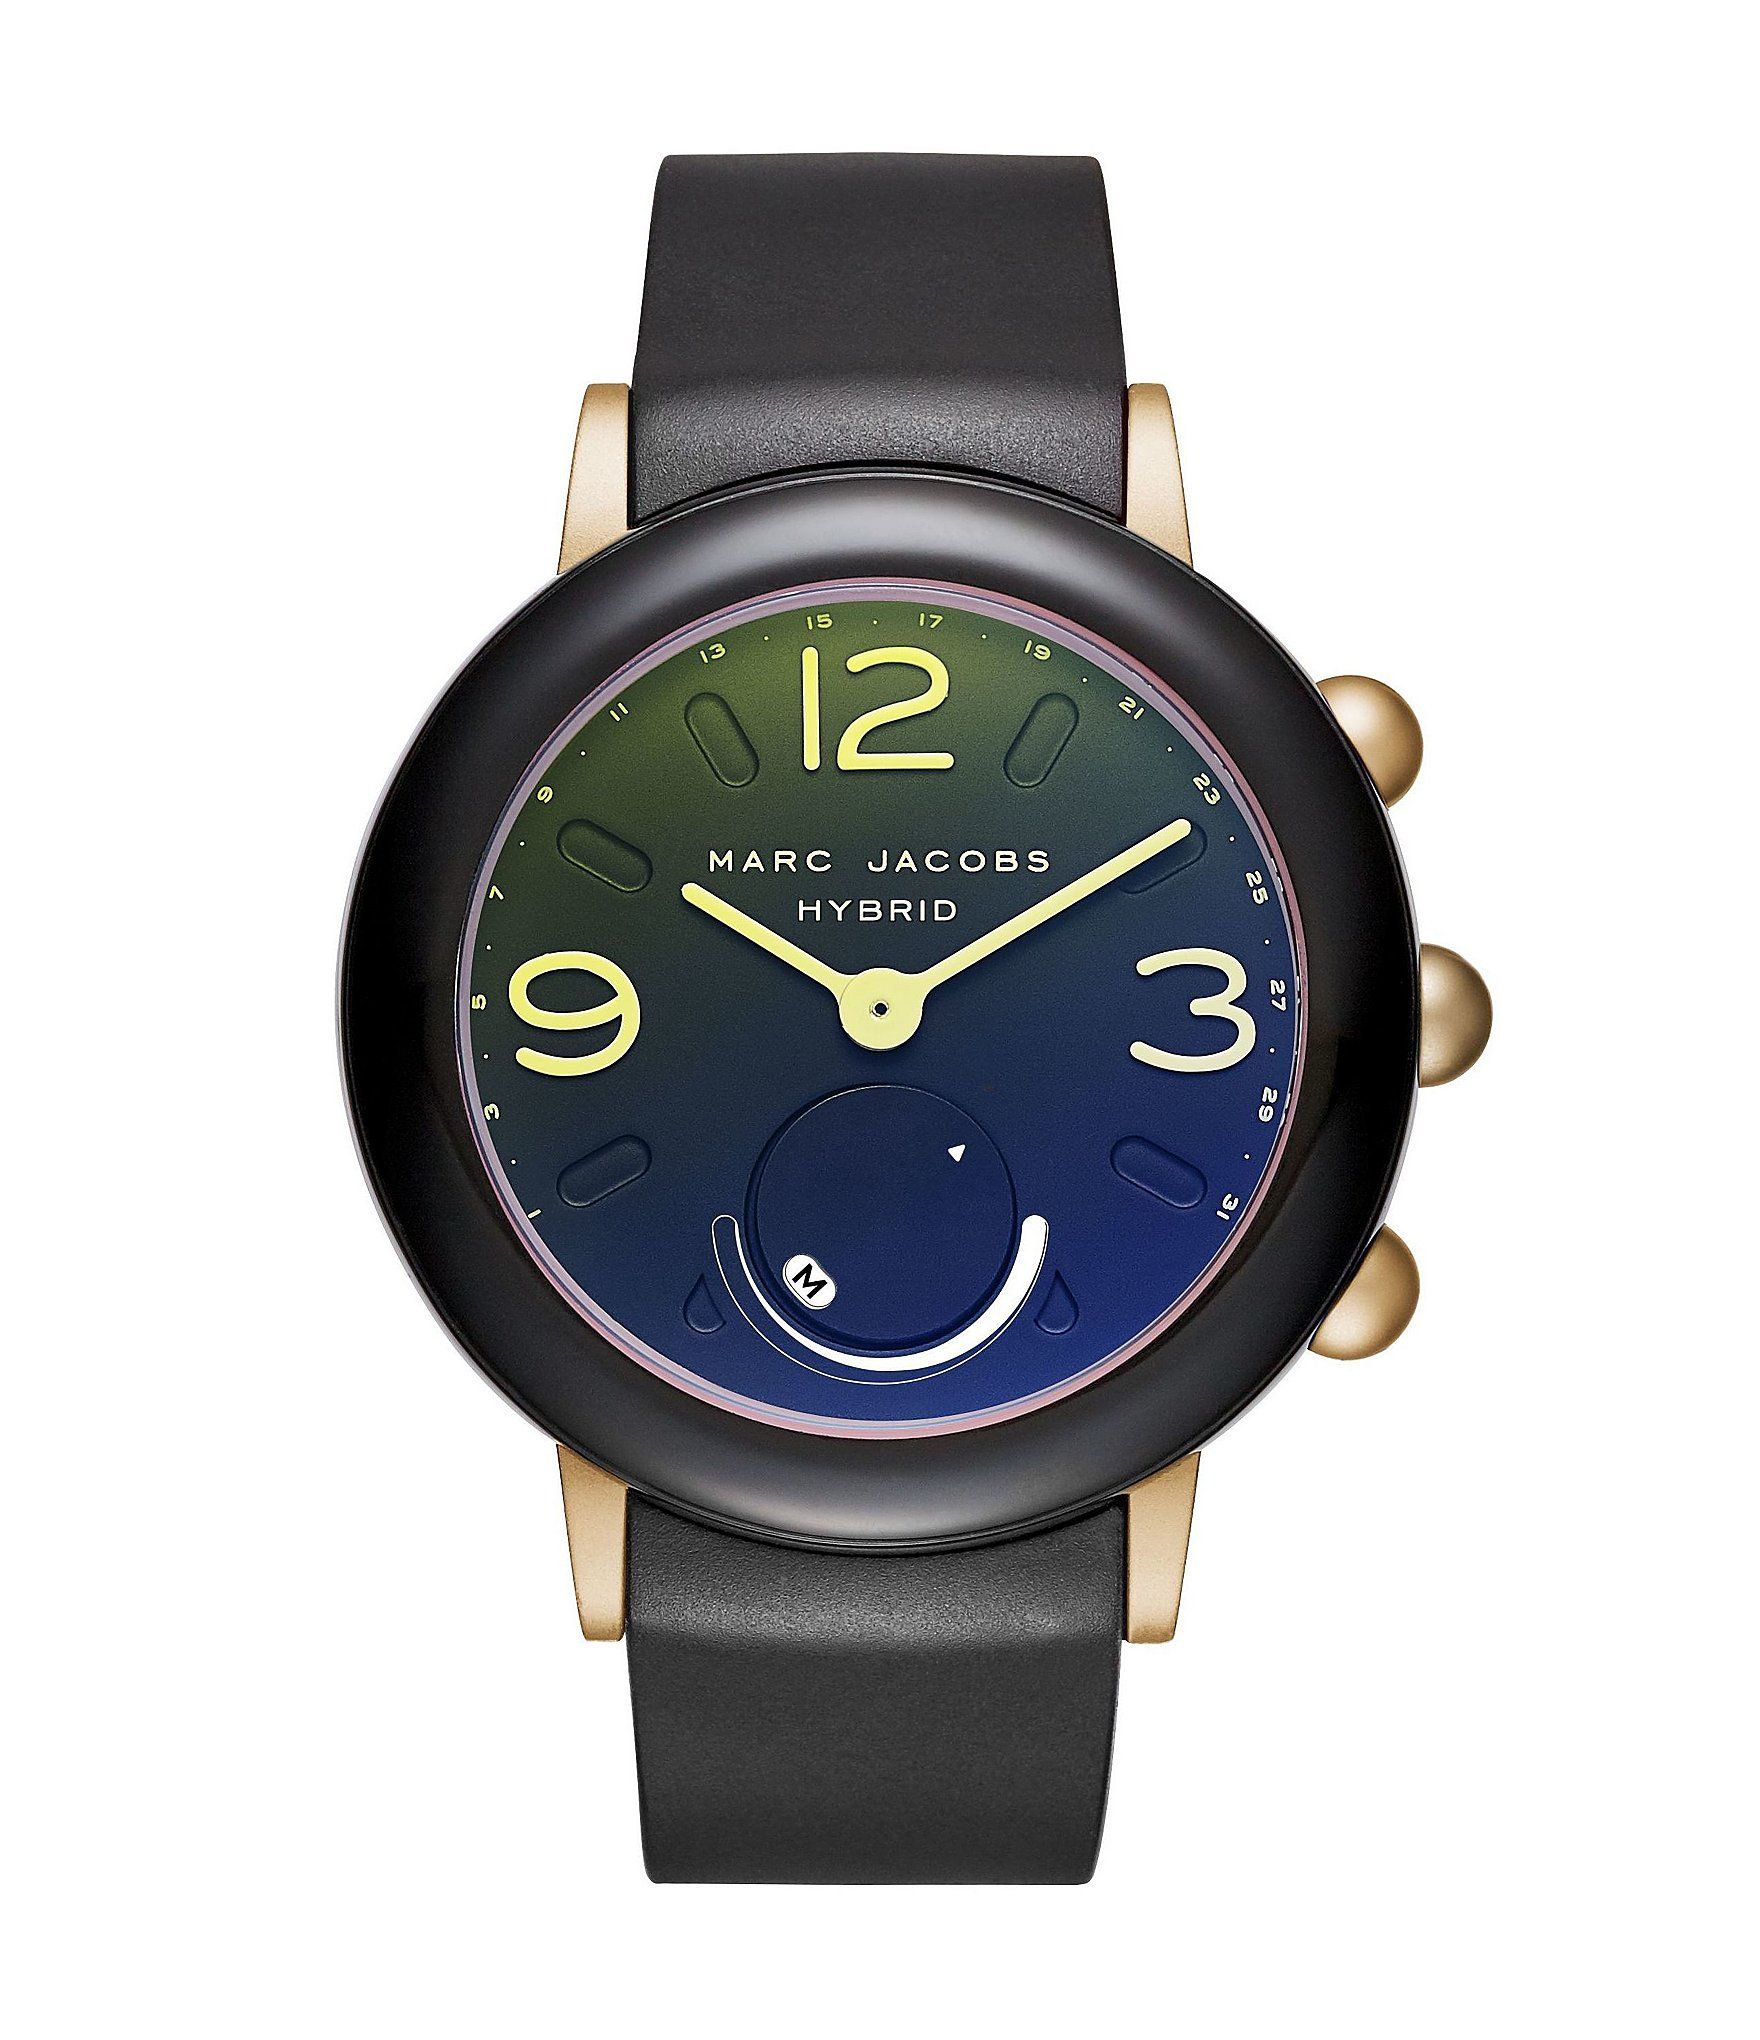 Marc Jacobs Riley Gold-Tone and Black Rubber Hybrid Smartwatch | Dillards Inc.